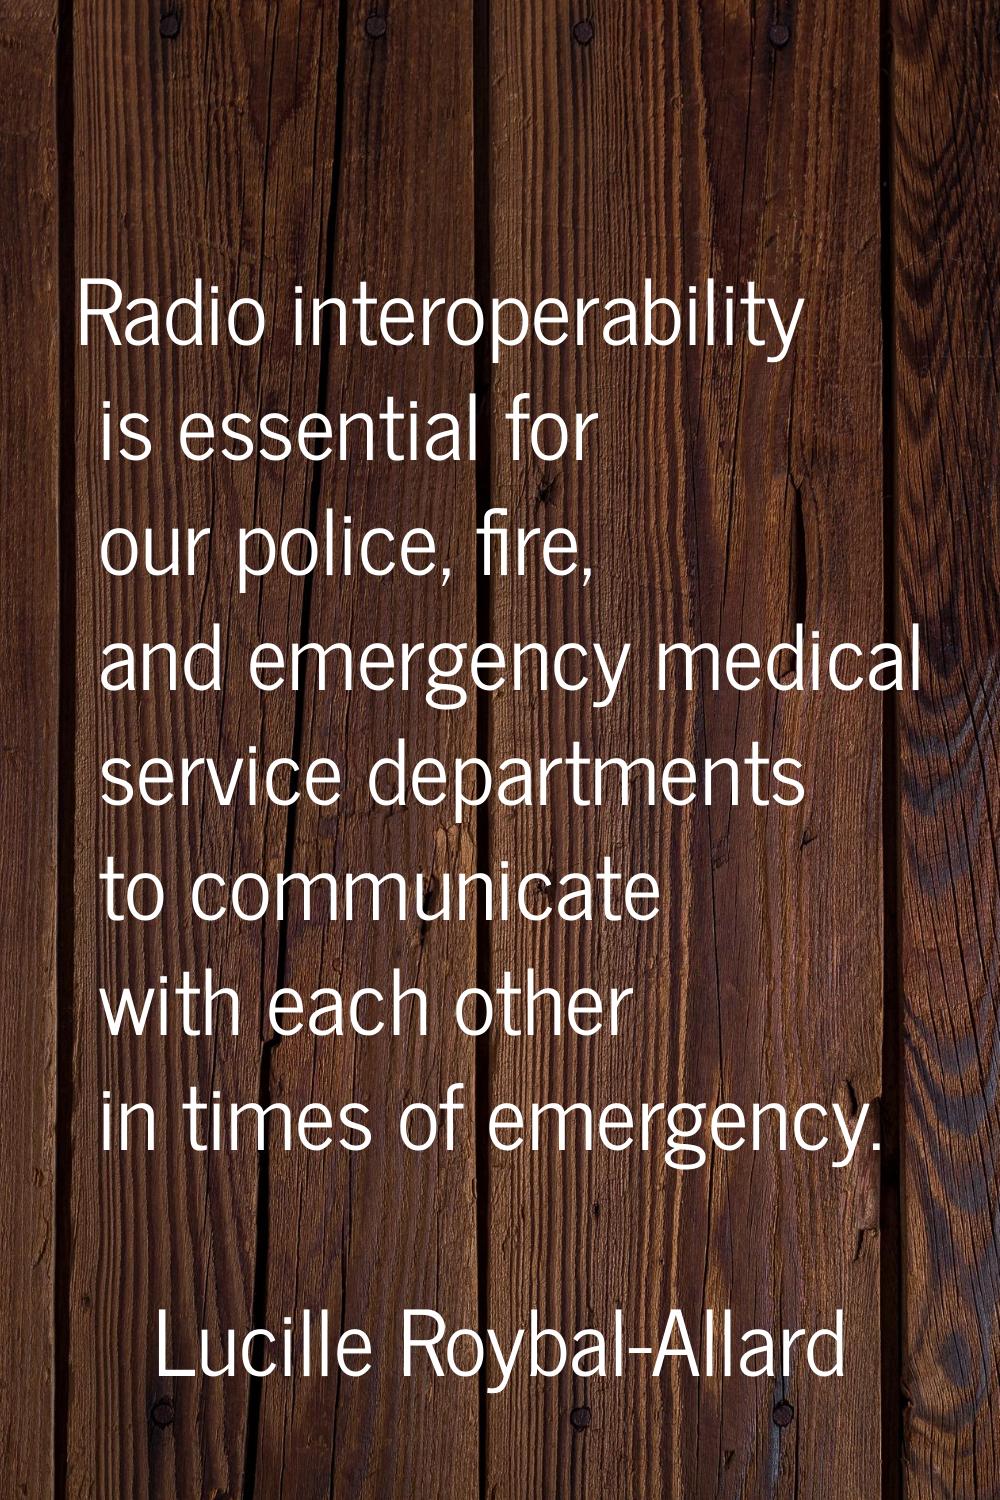 Radio interoperability is essential for our police, fire, and emergency medical service departments